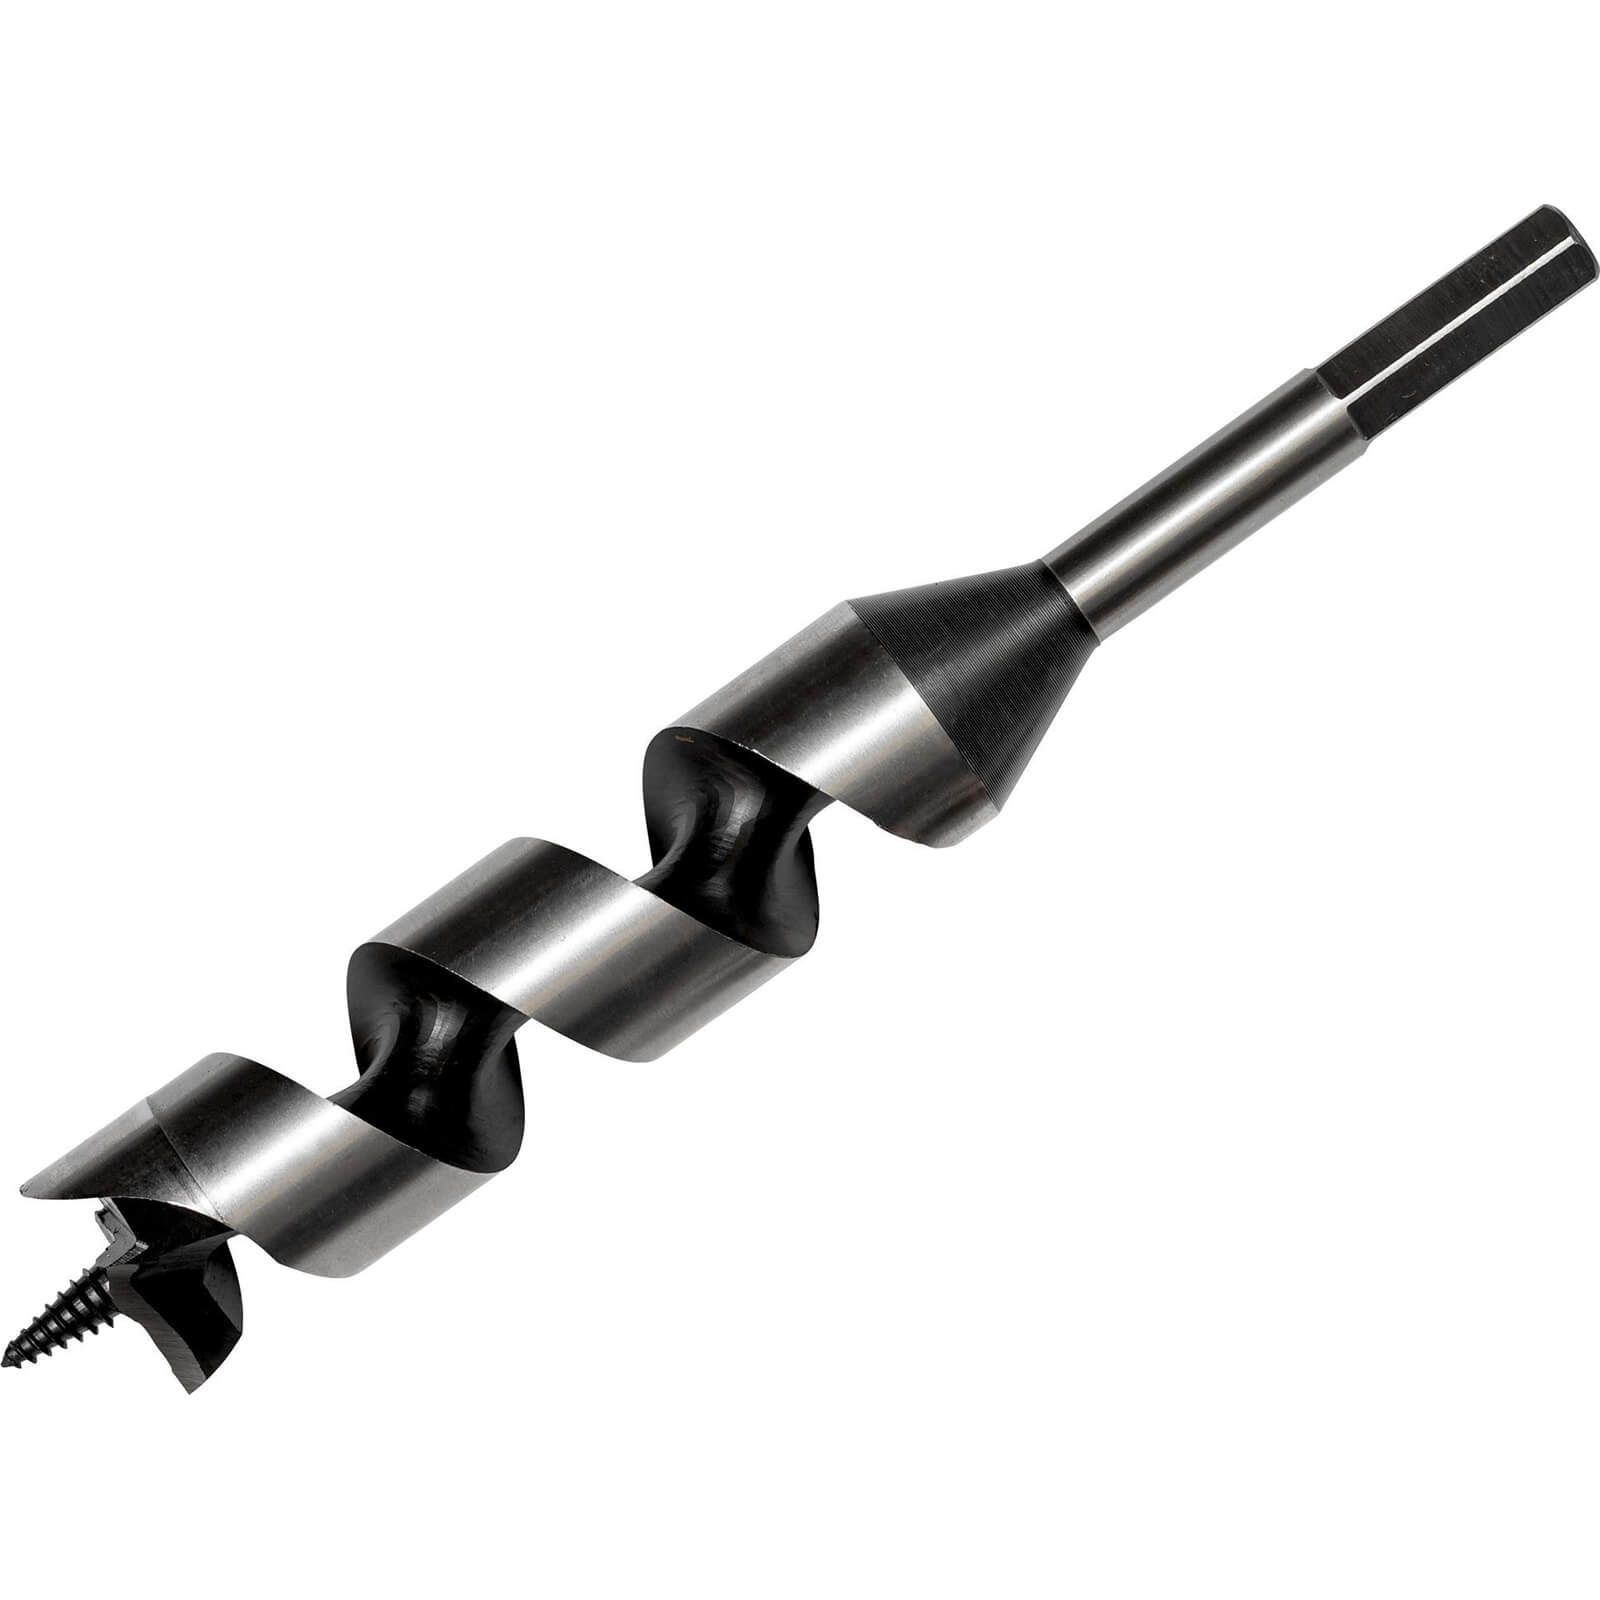 Photo of Bahco 9626 Series Combination Auger Drill Bit 7mm 230mm